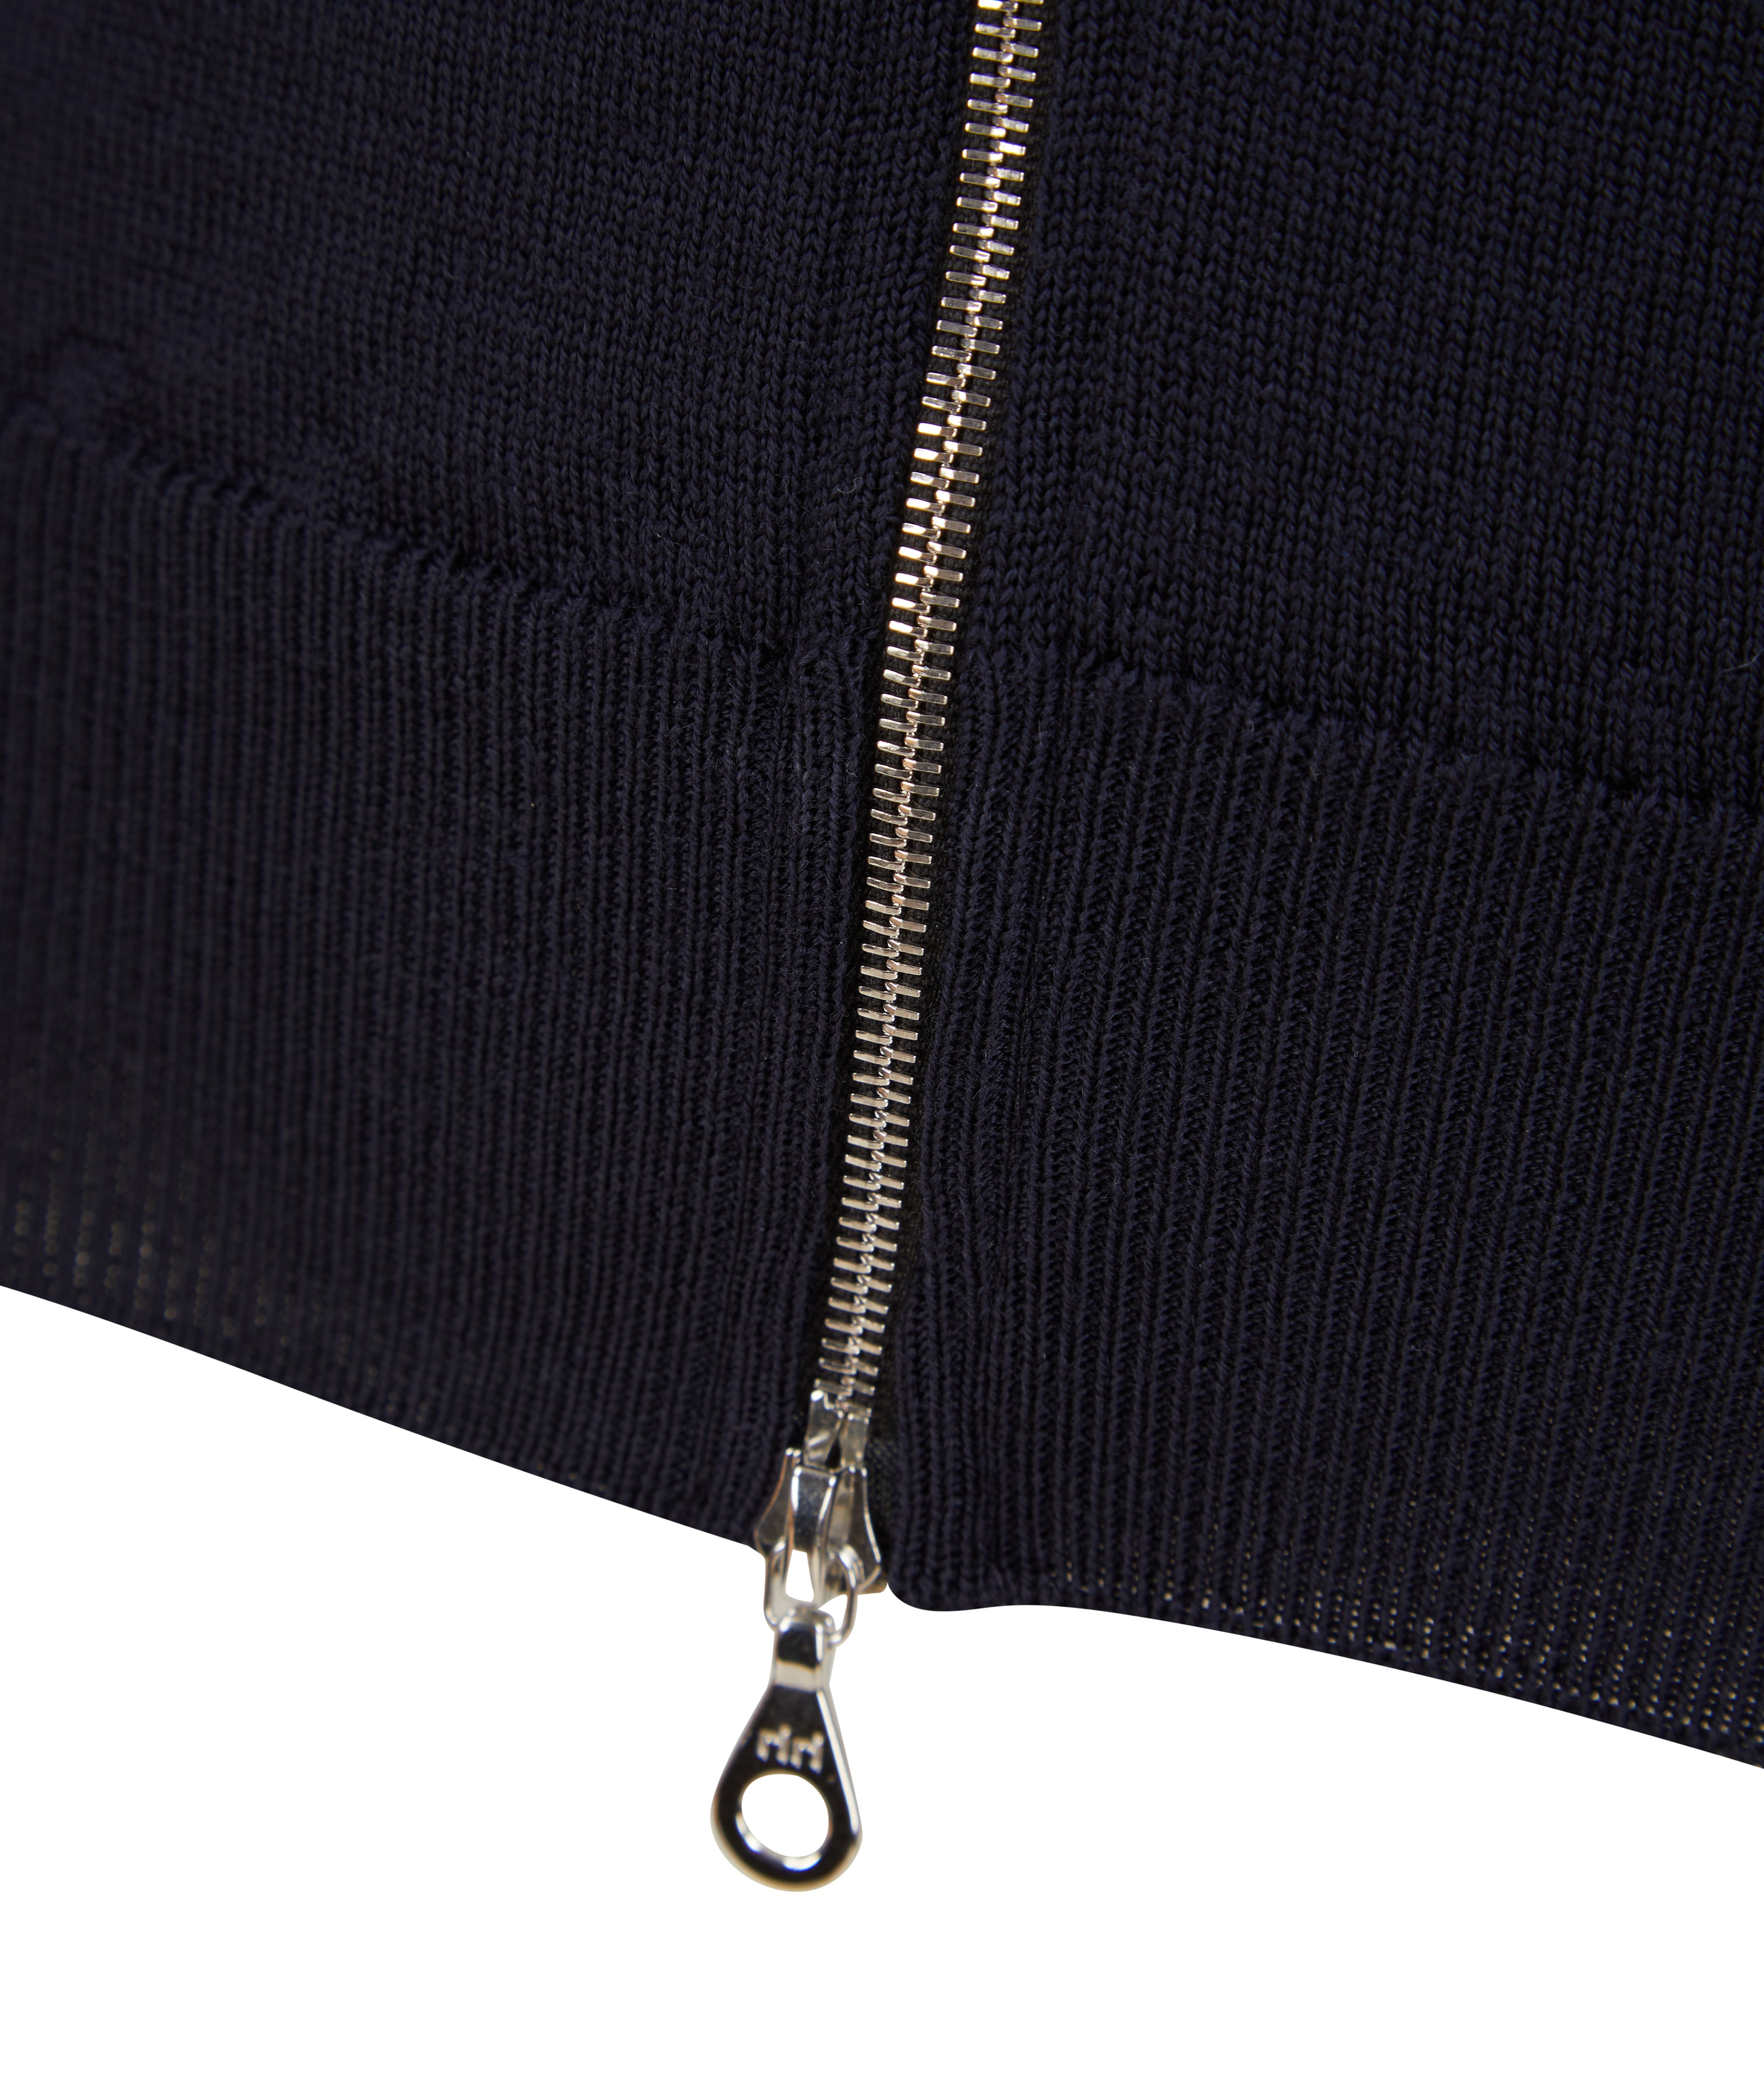 Load image into Gallery viewer, John Smedley Maclean Zip Navy
